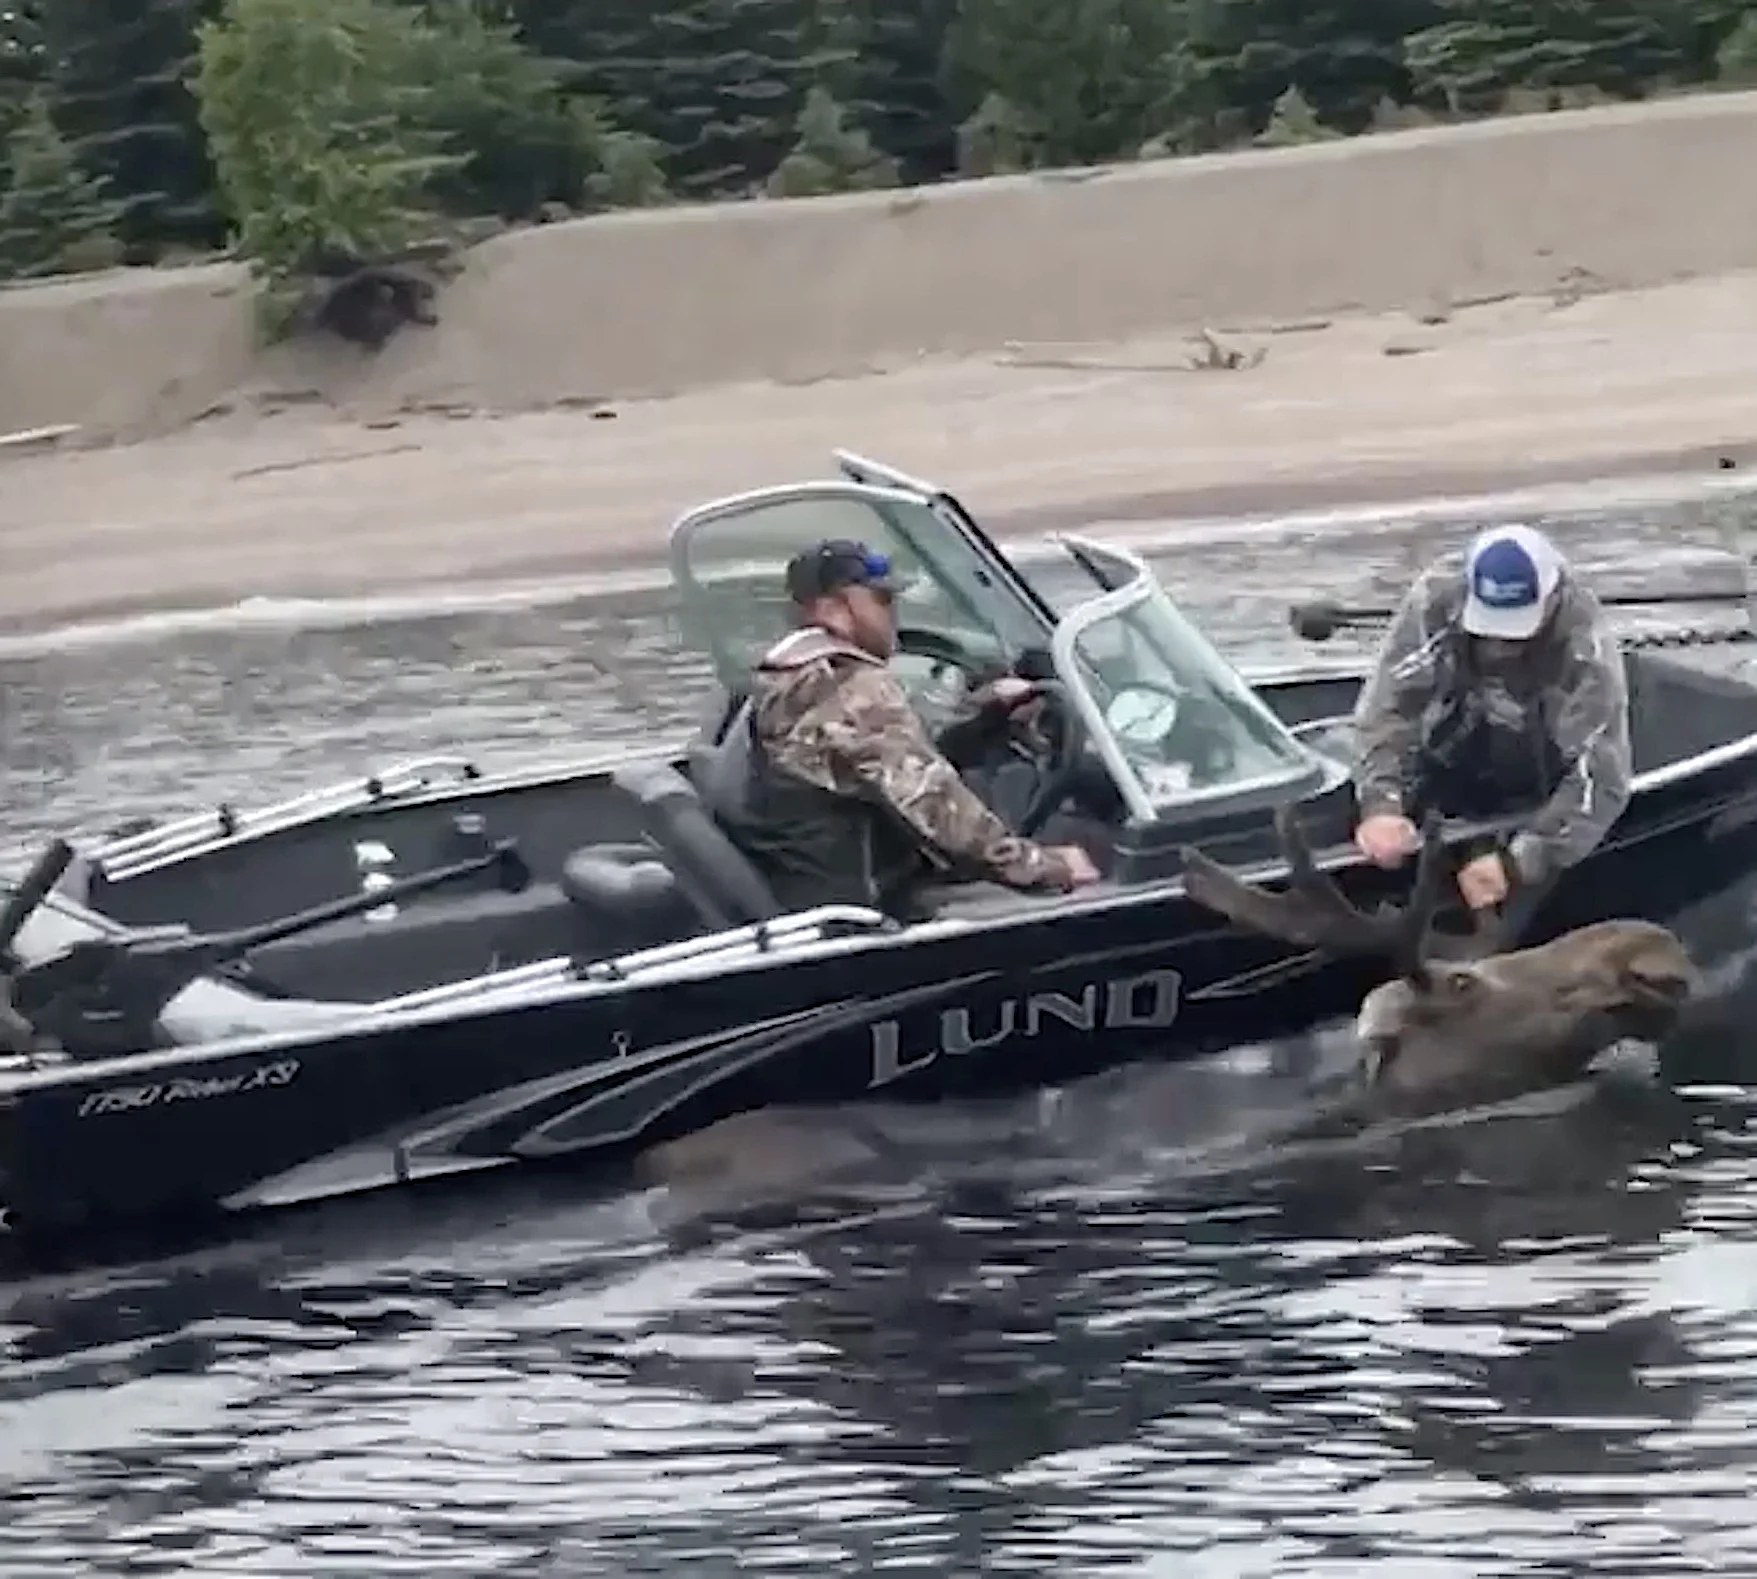 Angler puts himself at risk to save moose from drowning in Ontario